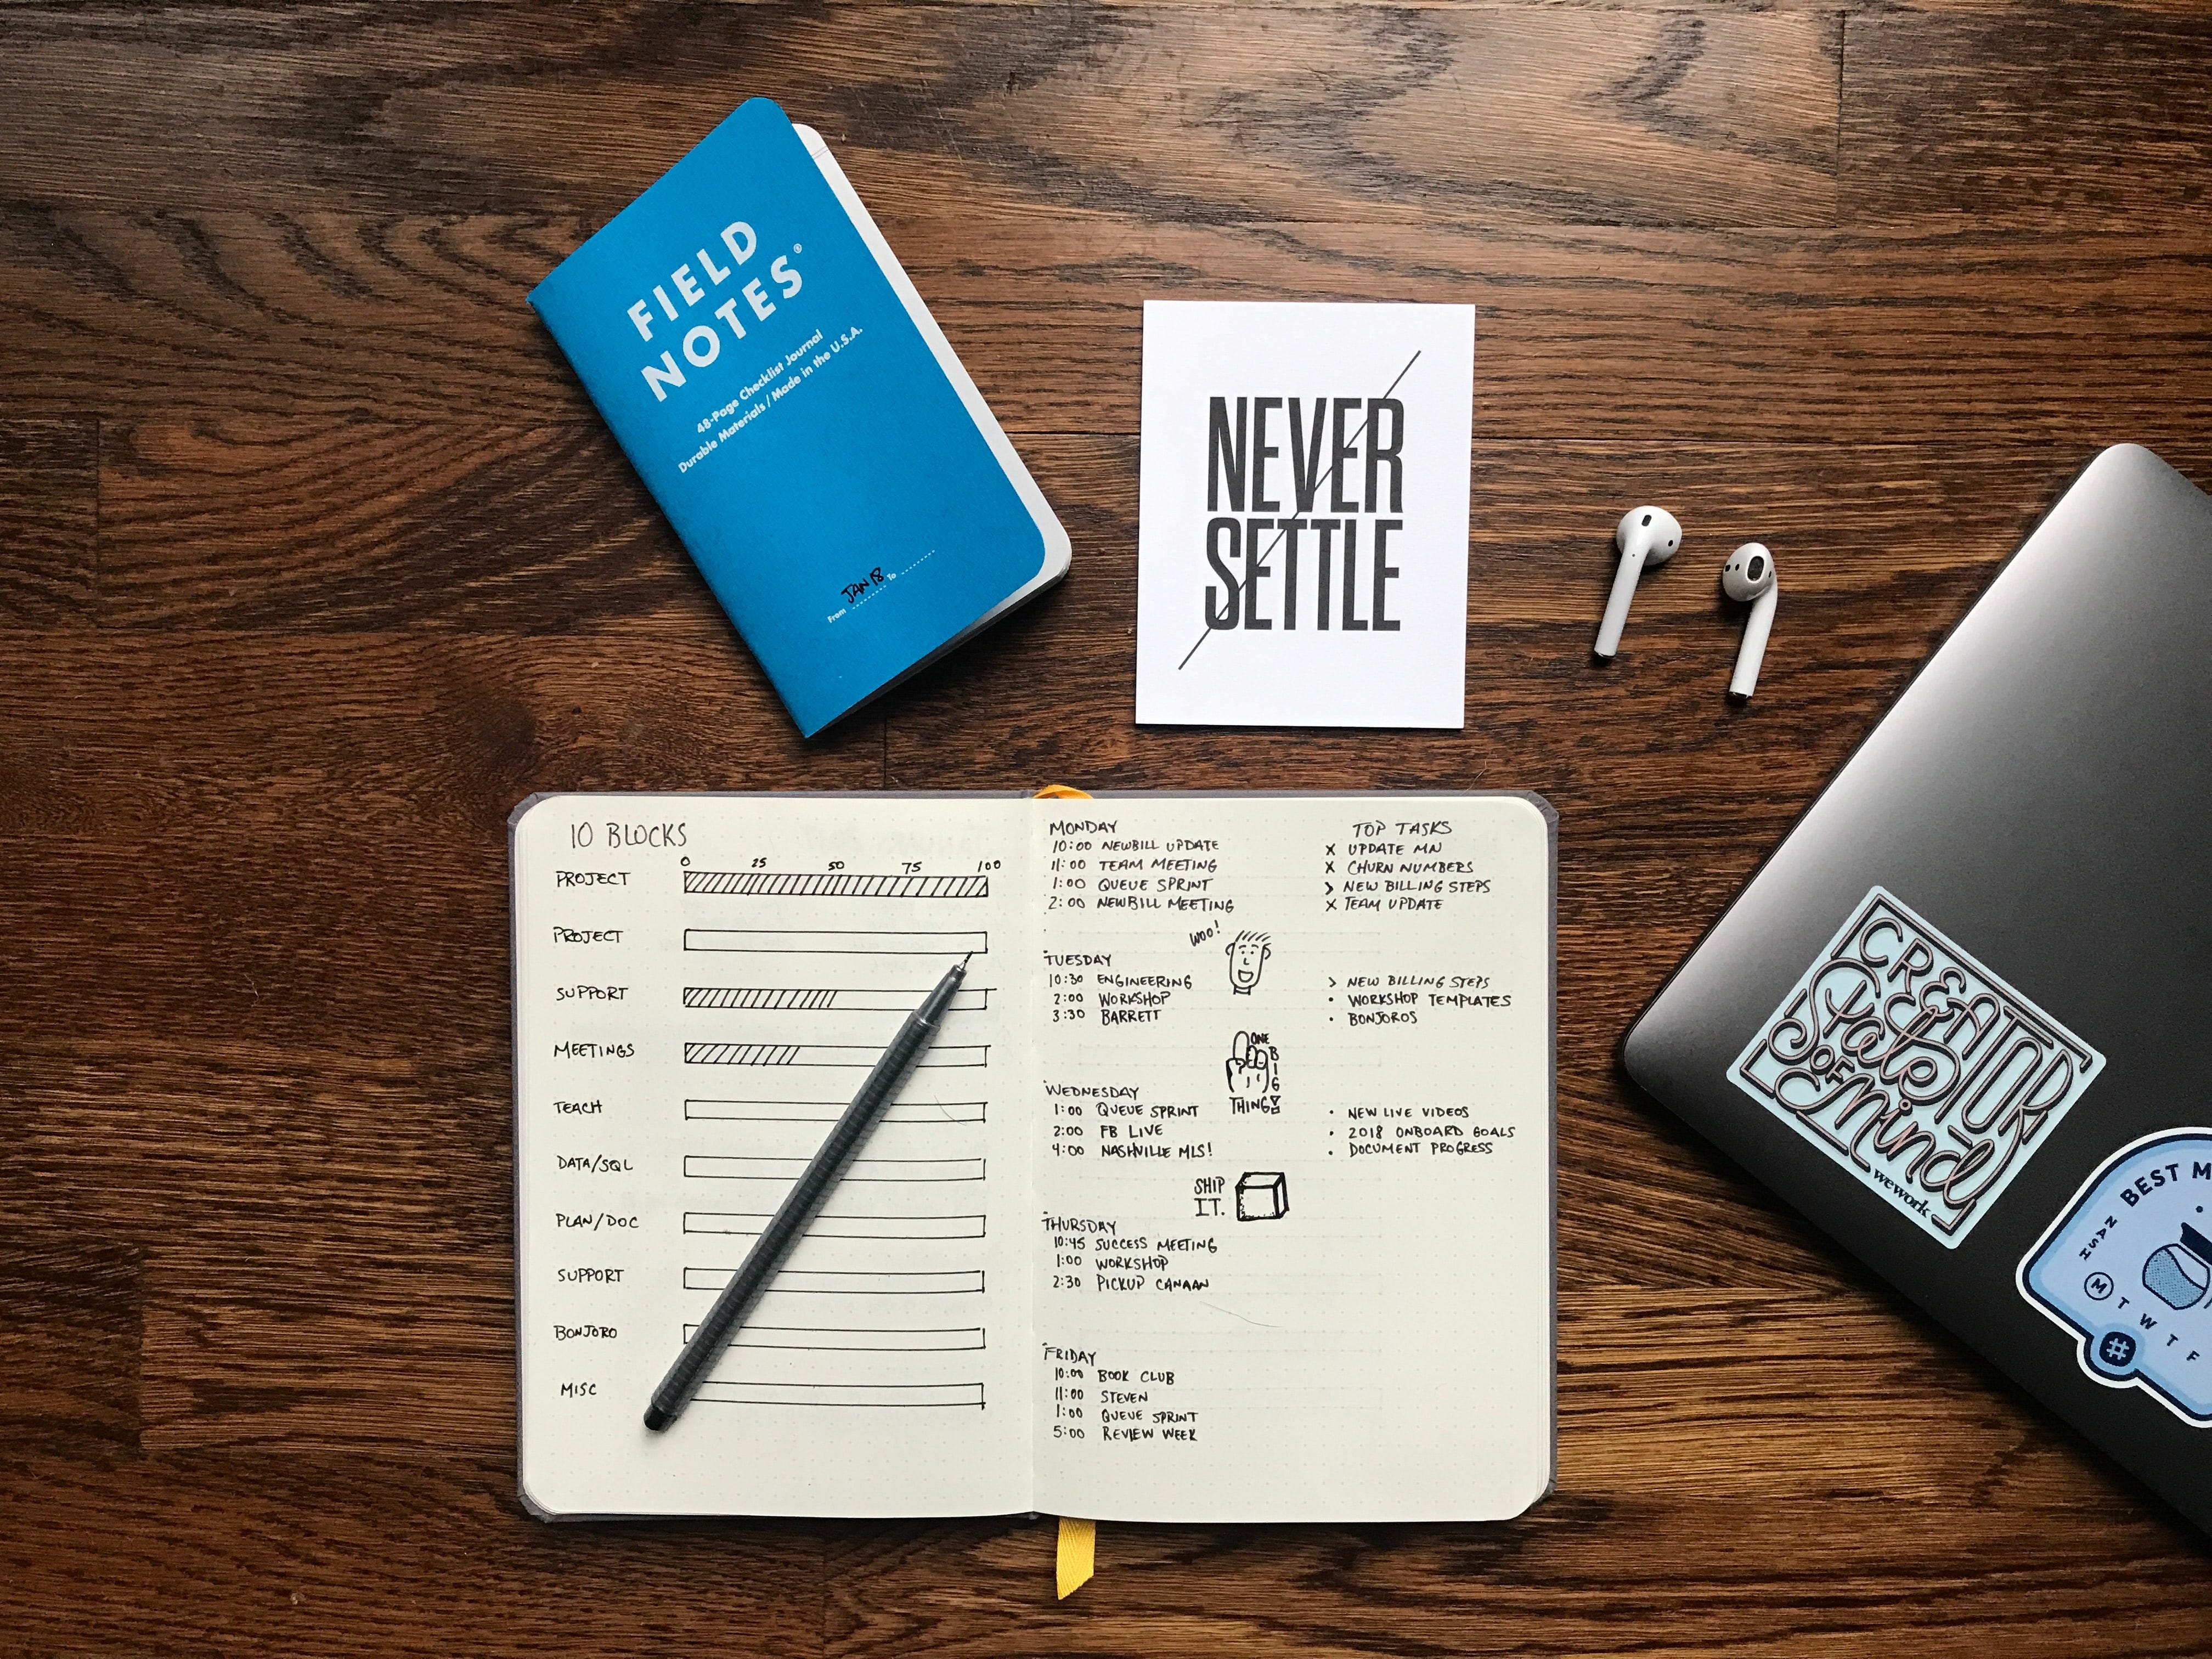 Bullet journal opened to task tracking and to-do lists; small notebook; pair of earbuds.